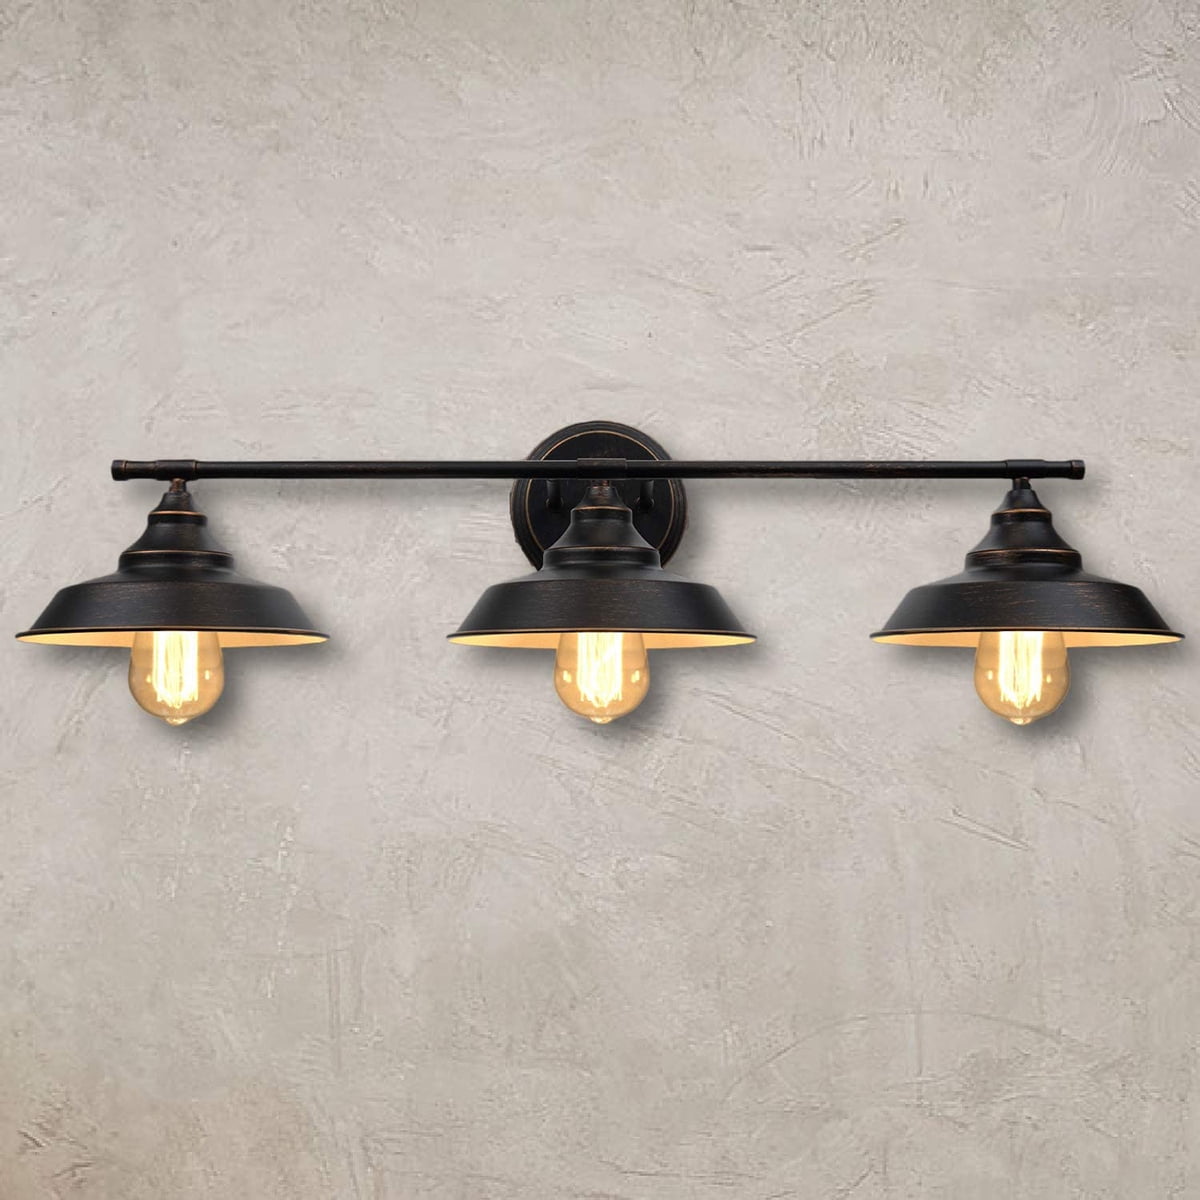 Details about   Vintage Vanity Light Industrial Wall Sconce Hardwire Bathroom Wall Light Fixture 